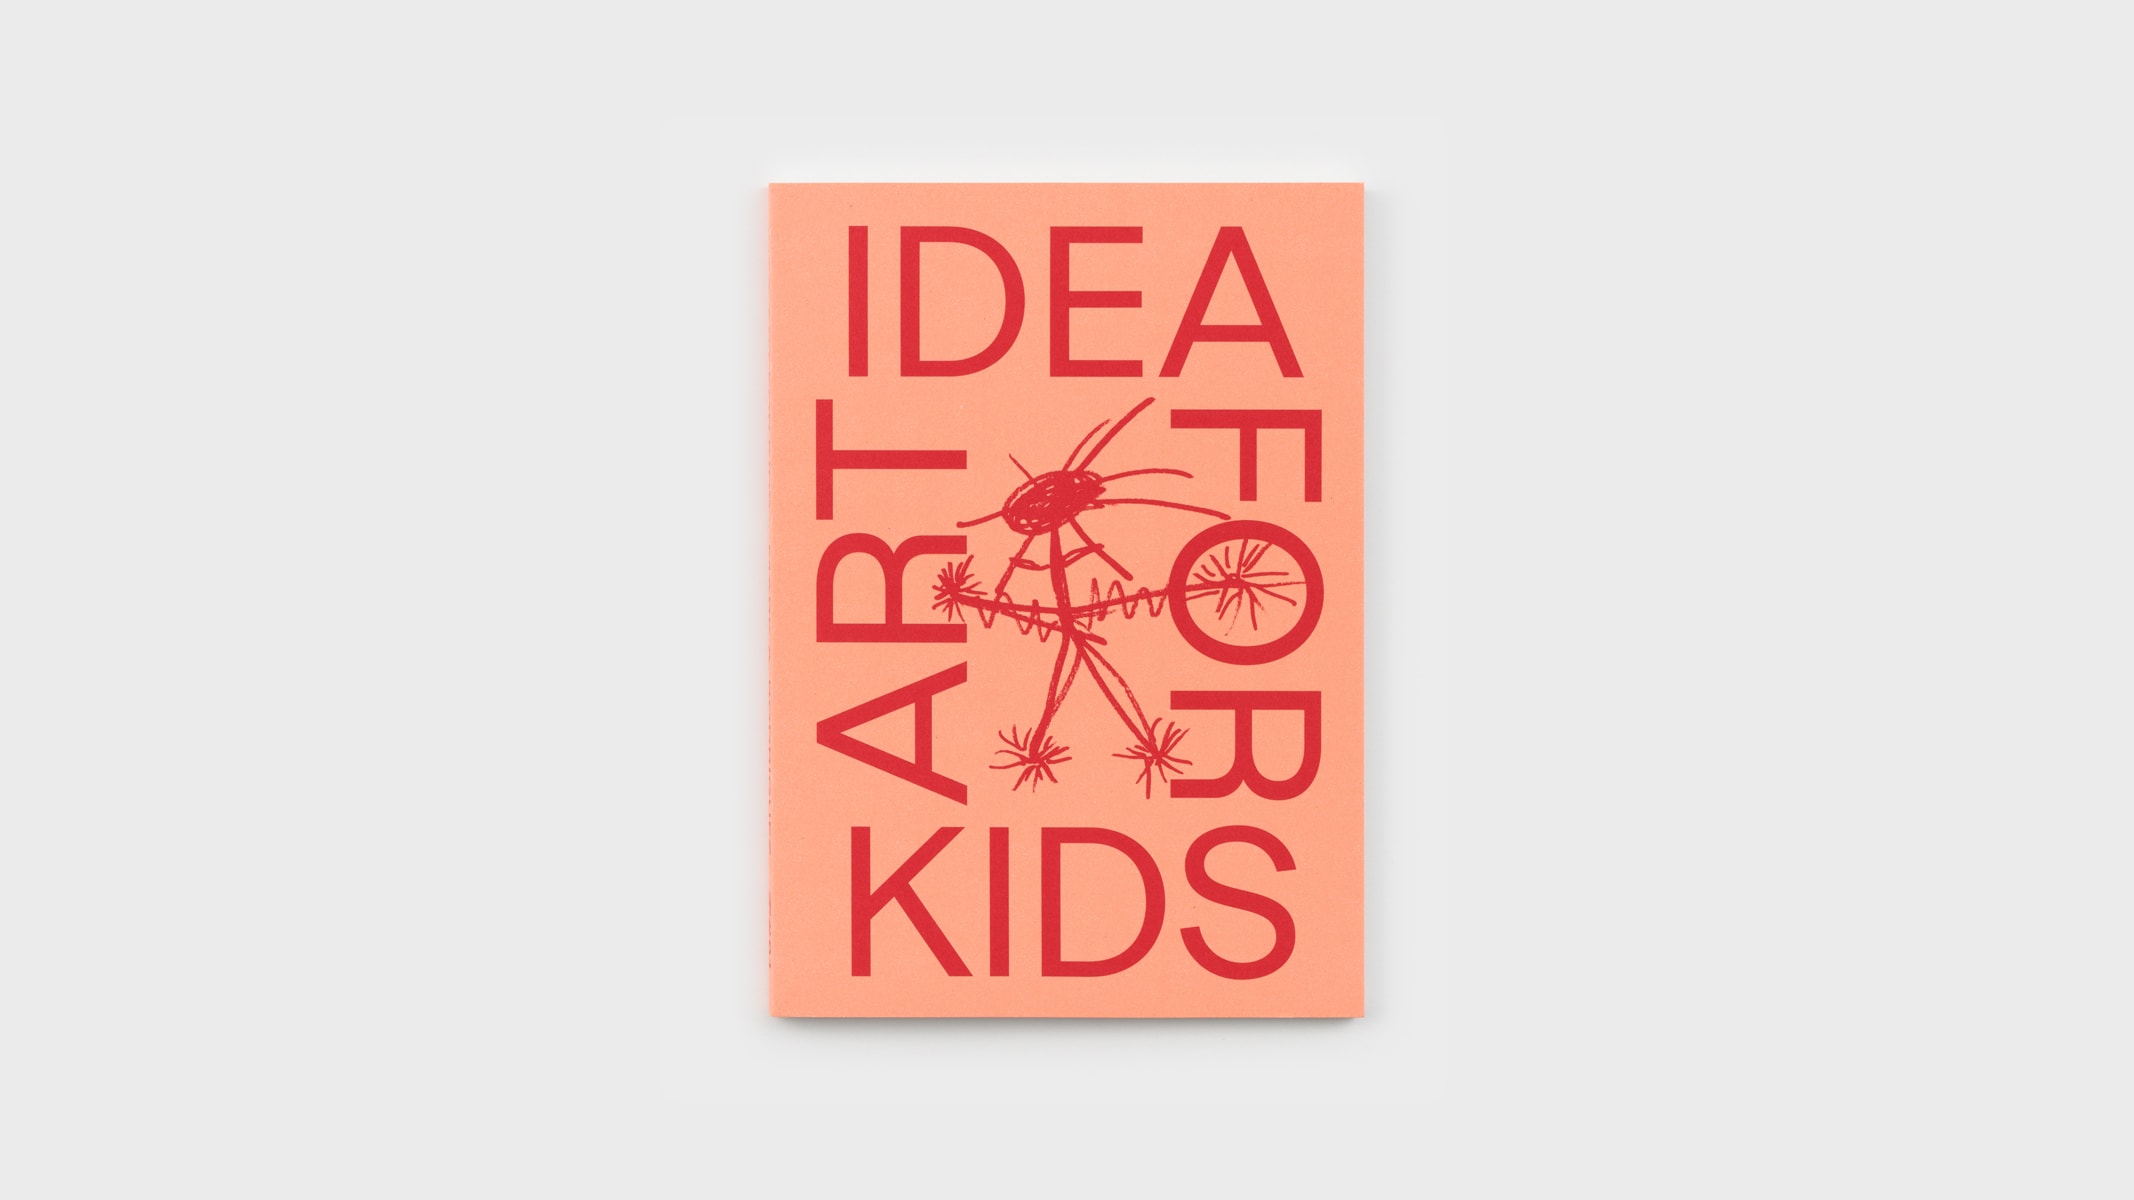 A photograph of the front cover of Idea Art for Kids. The title is arranged as a square, with 'Idea' at the top, 'For' on the right, 'Art' on the left, and 'Kids' on the bottom. In the middle is a child's drawing of an extraterrestrial stick figure.